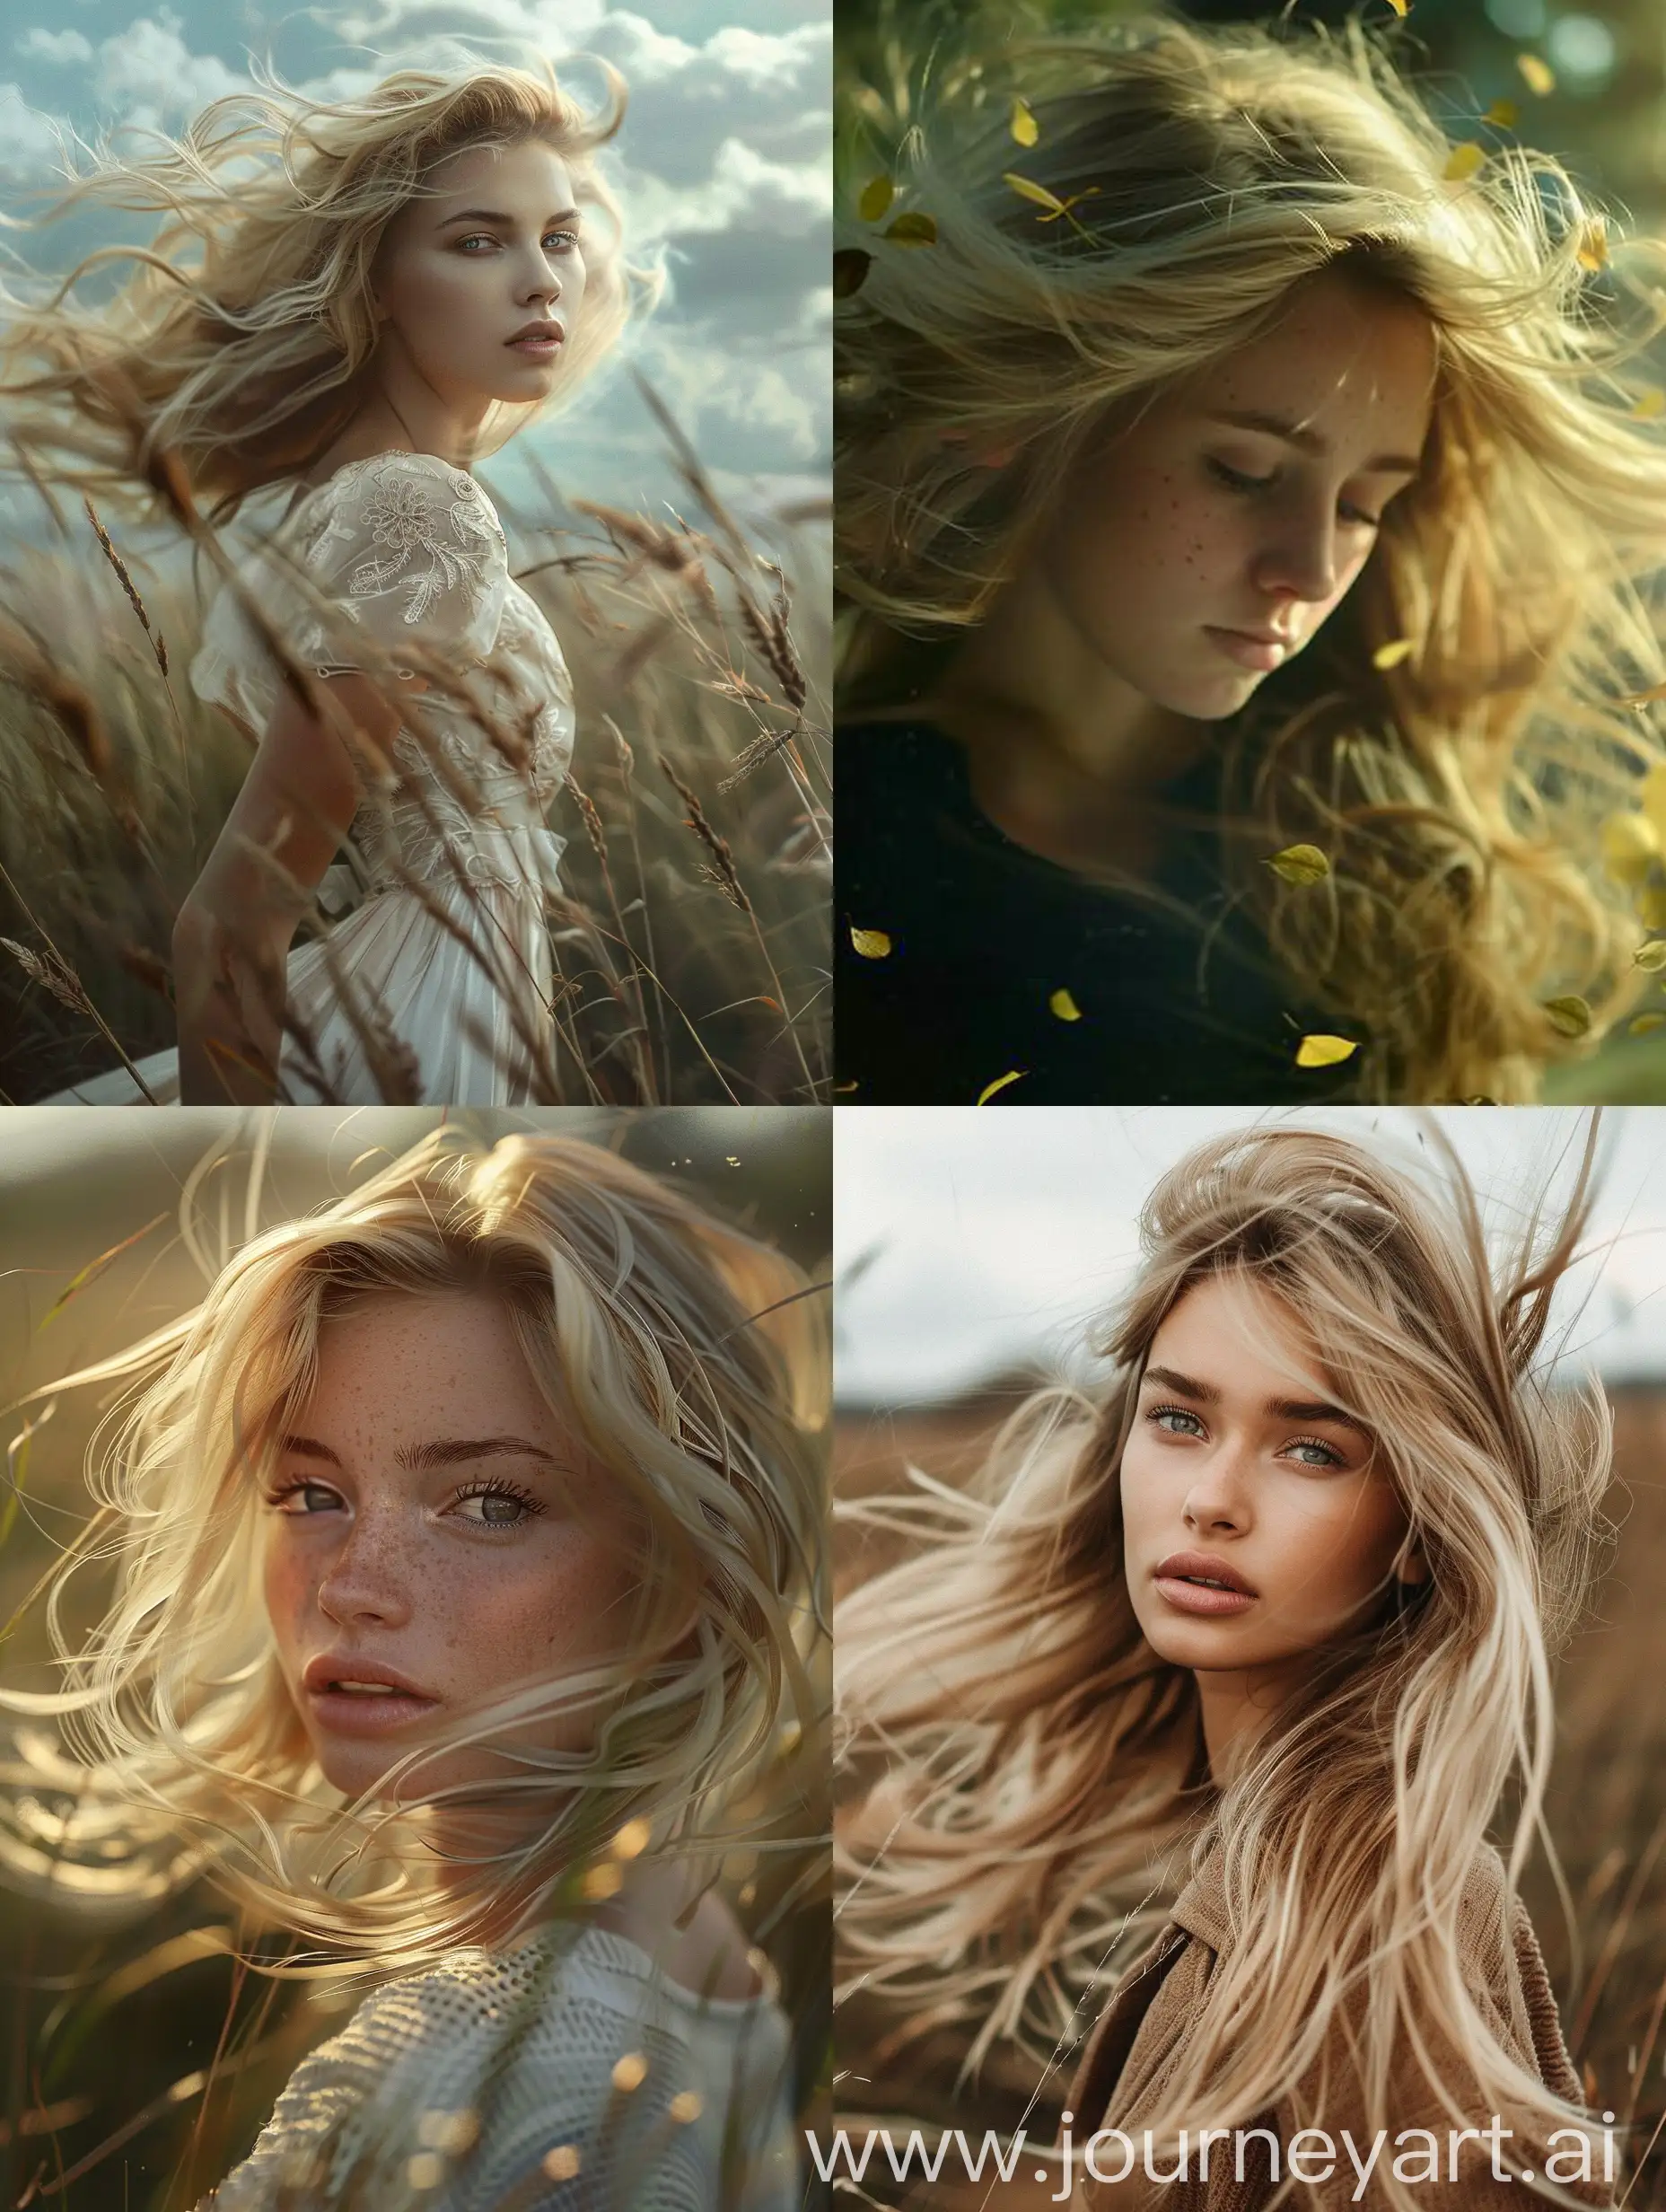 Generate a realistic woman with blonde hair blowing in the wind in a nature